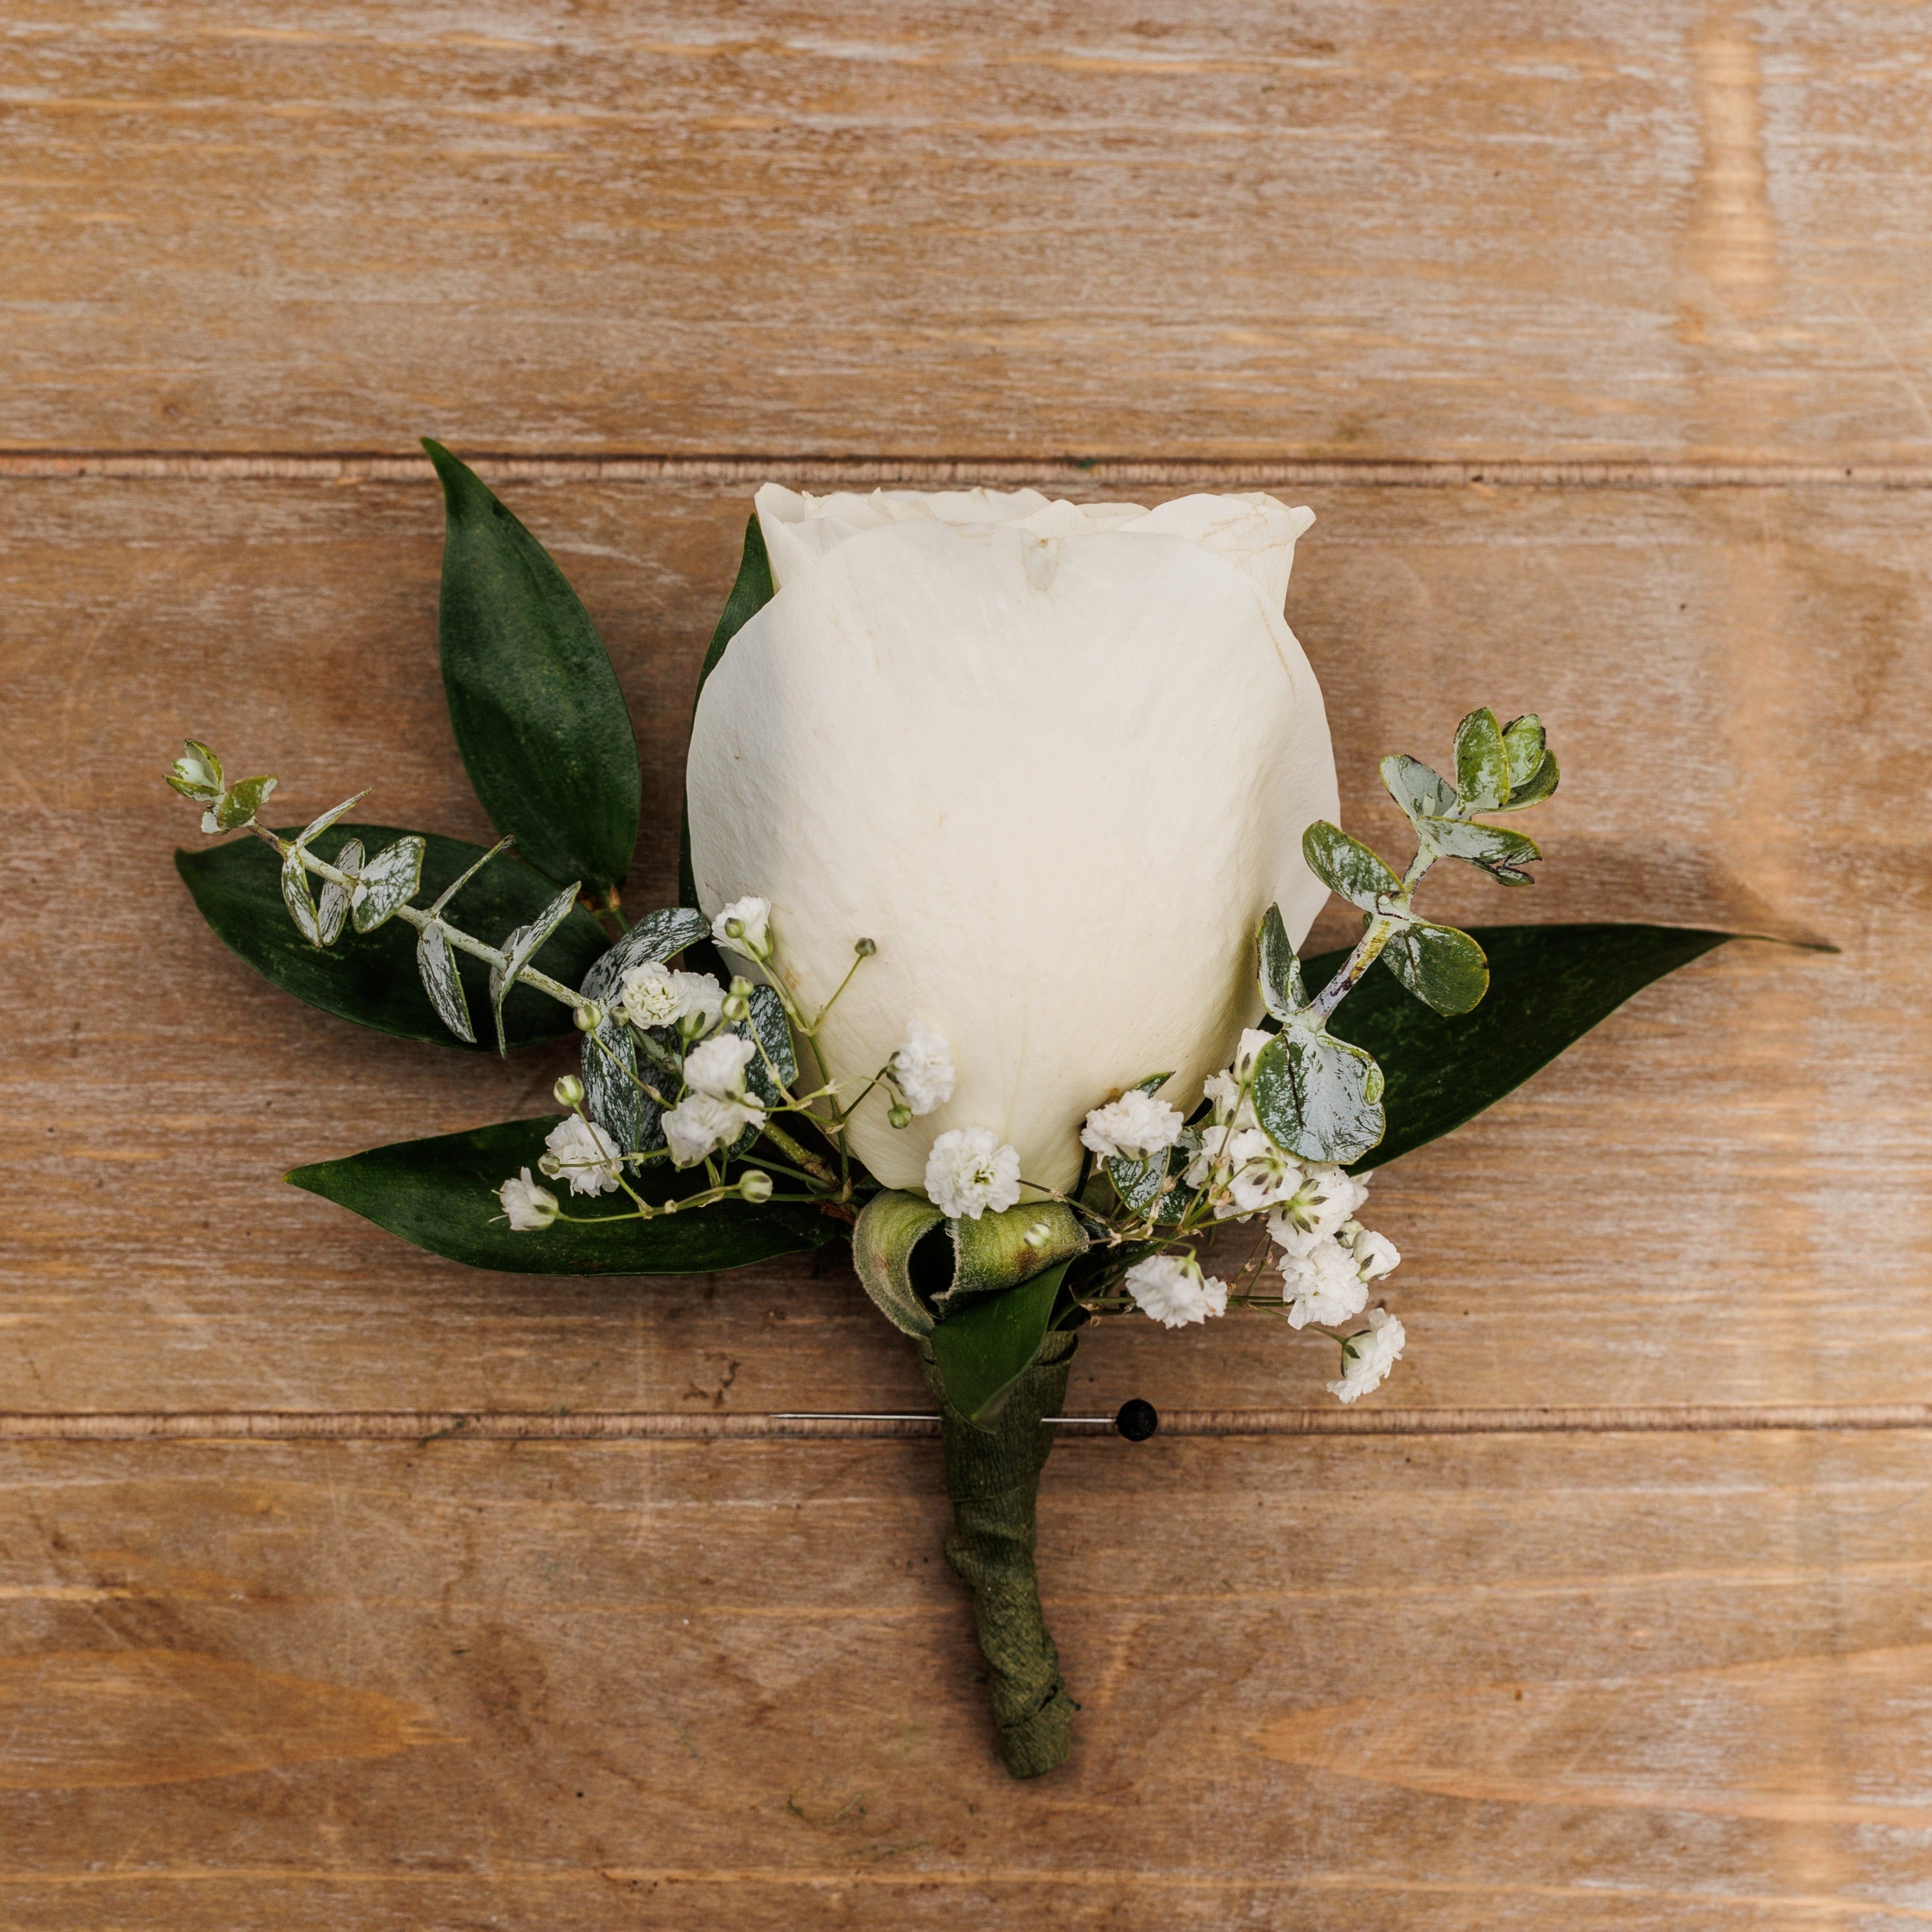 A white rose boutonniere.